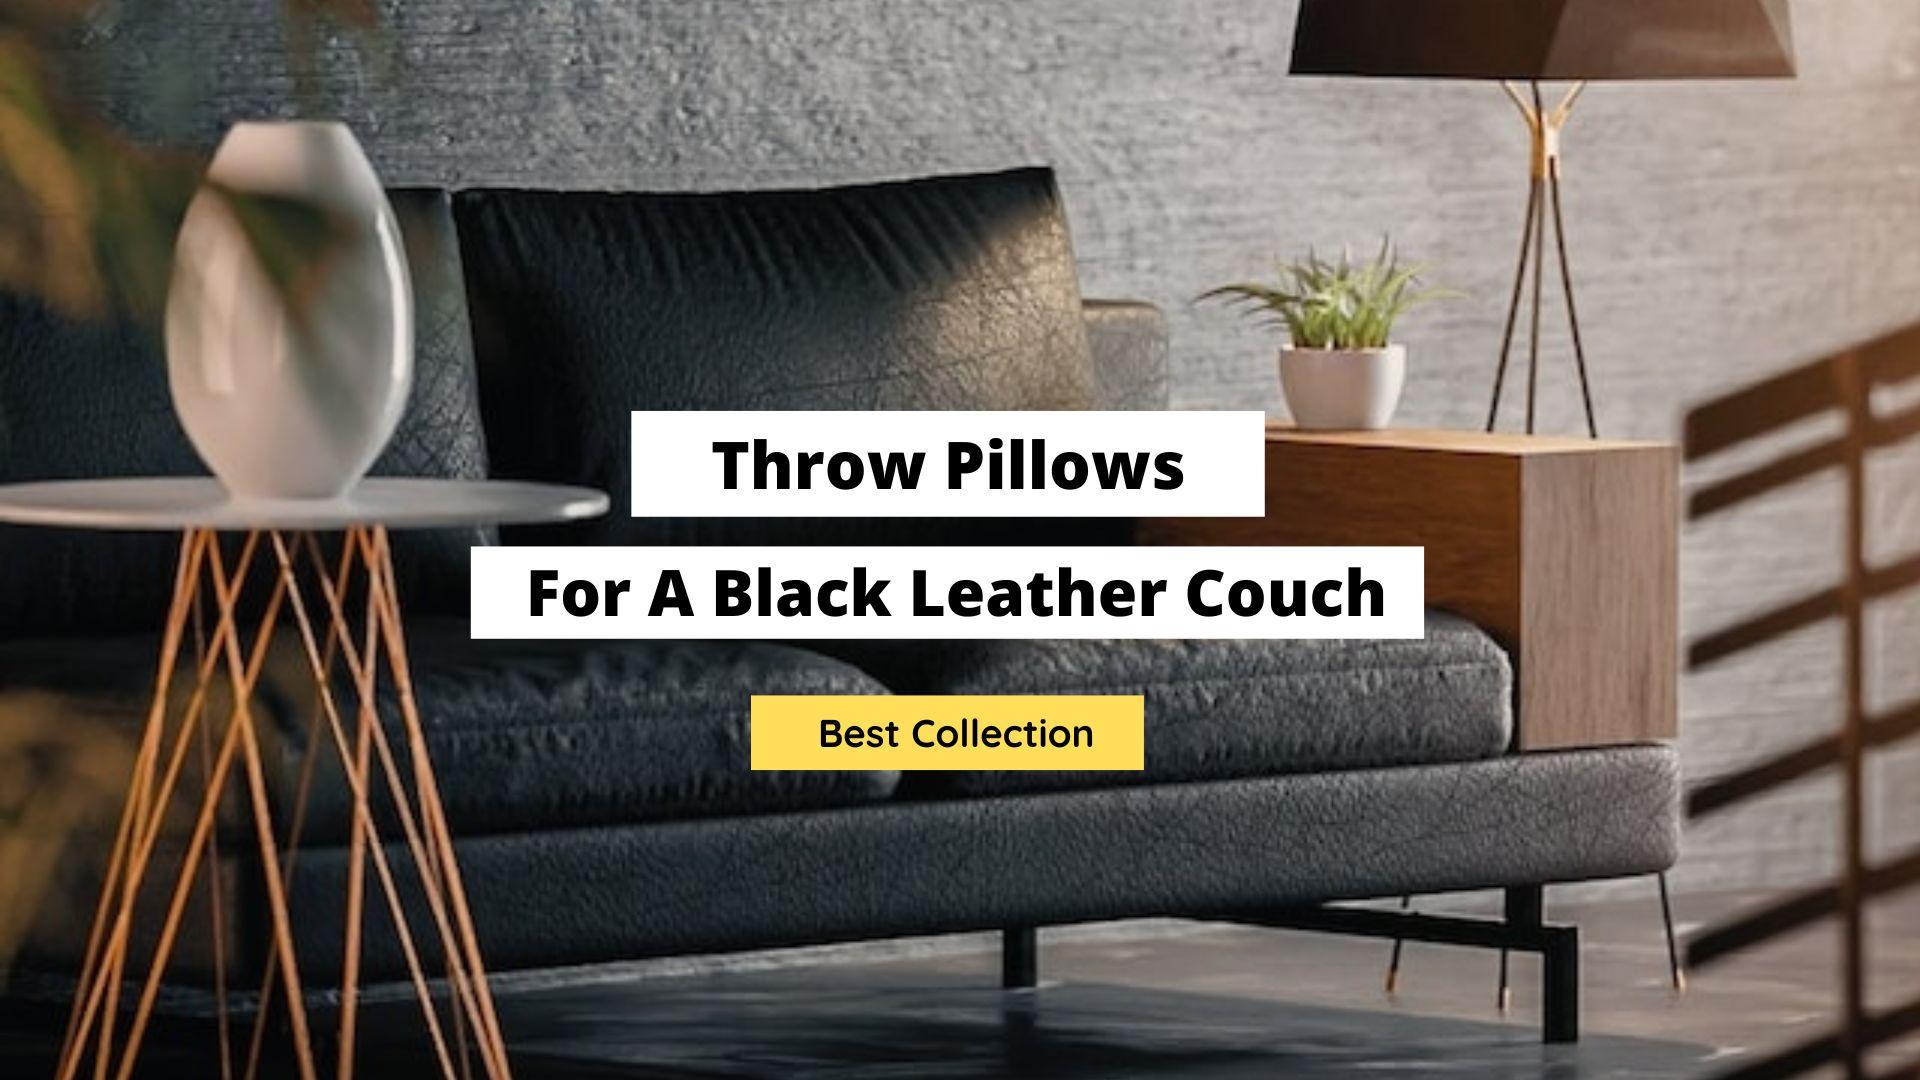 Throw Pillows For A Black Leather Couch